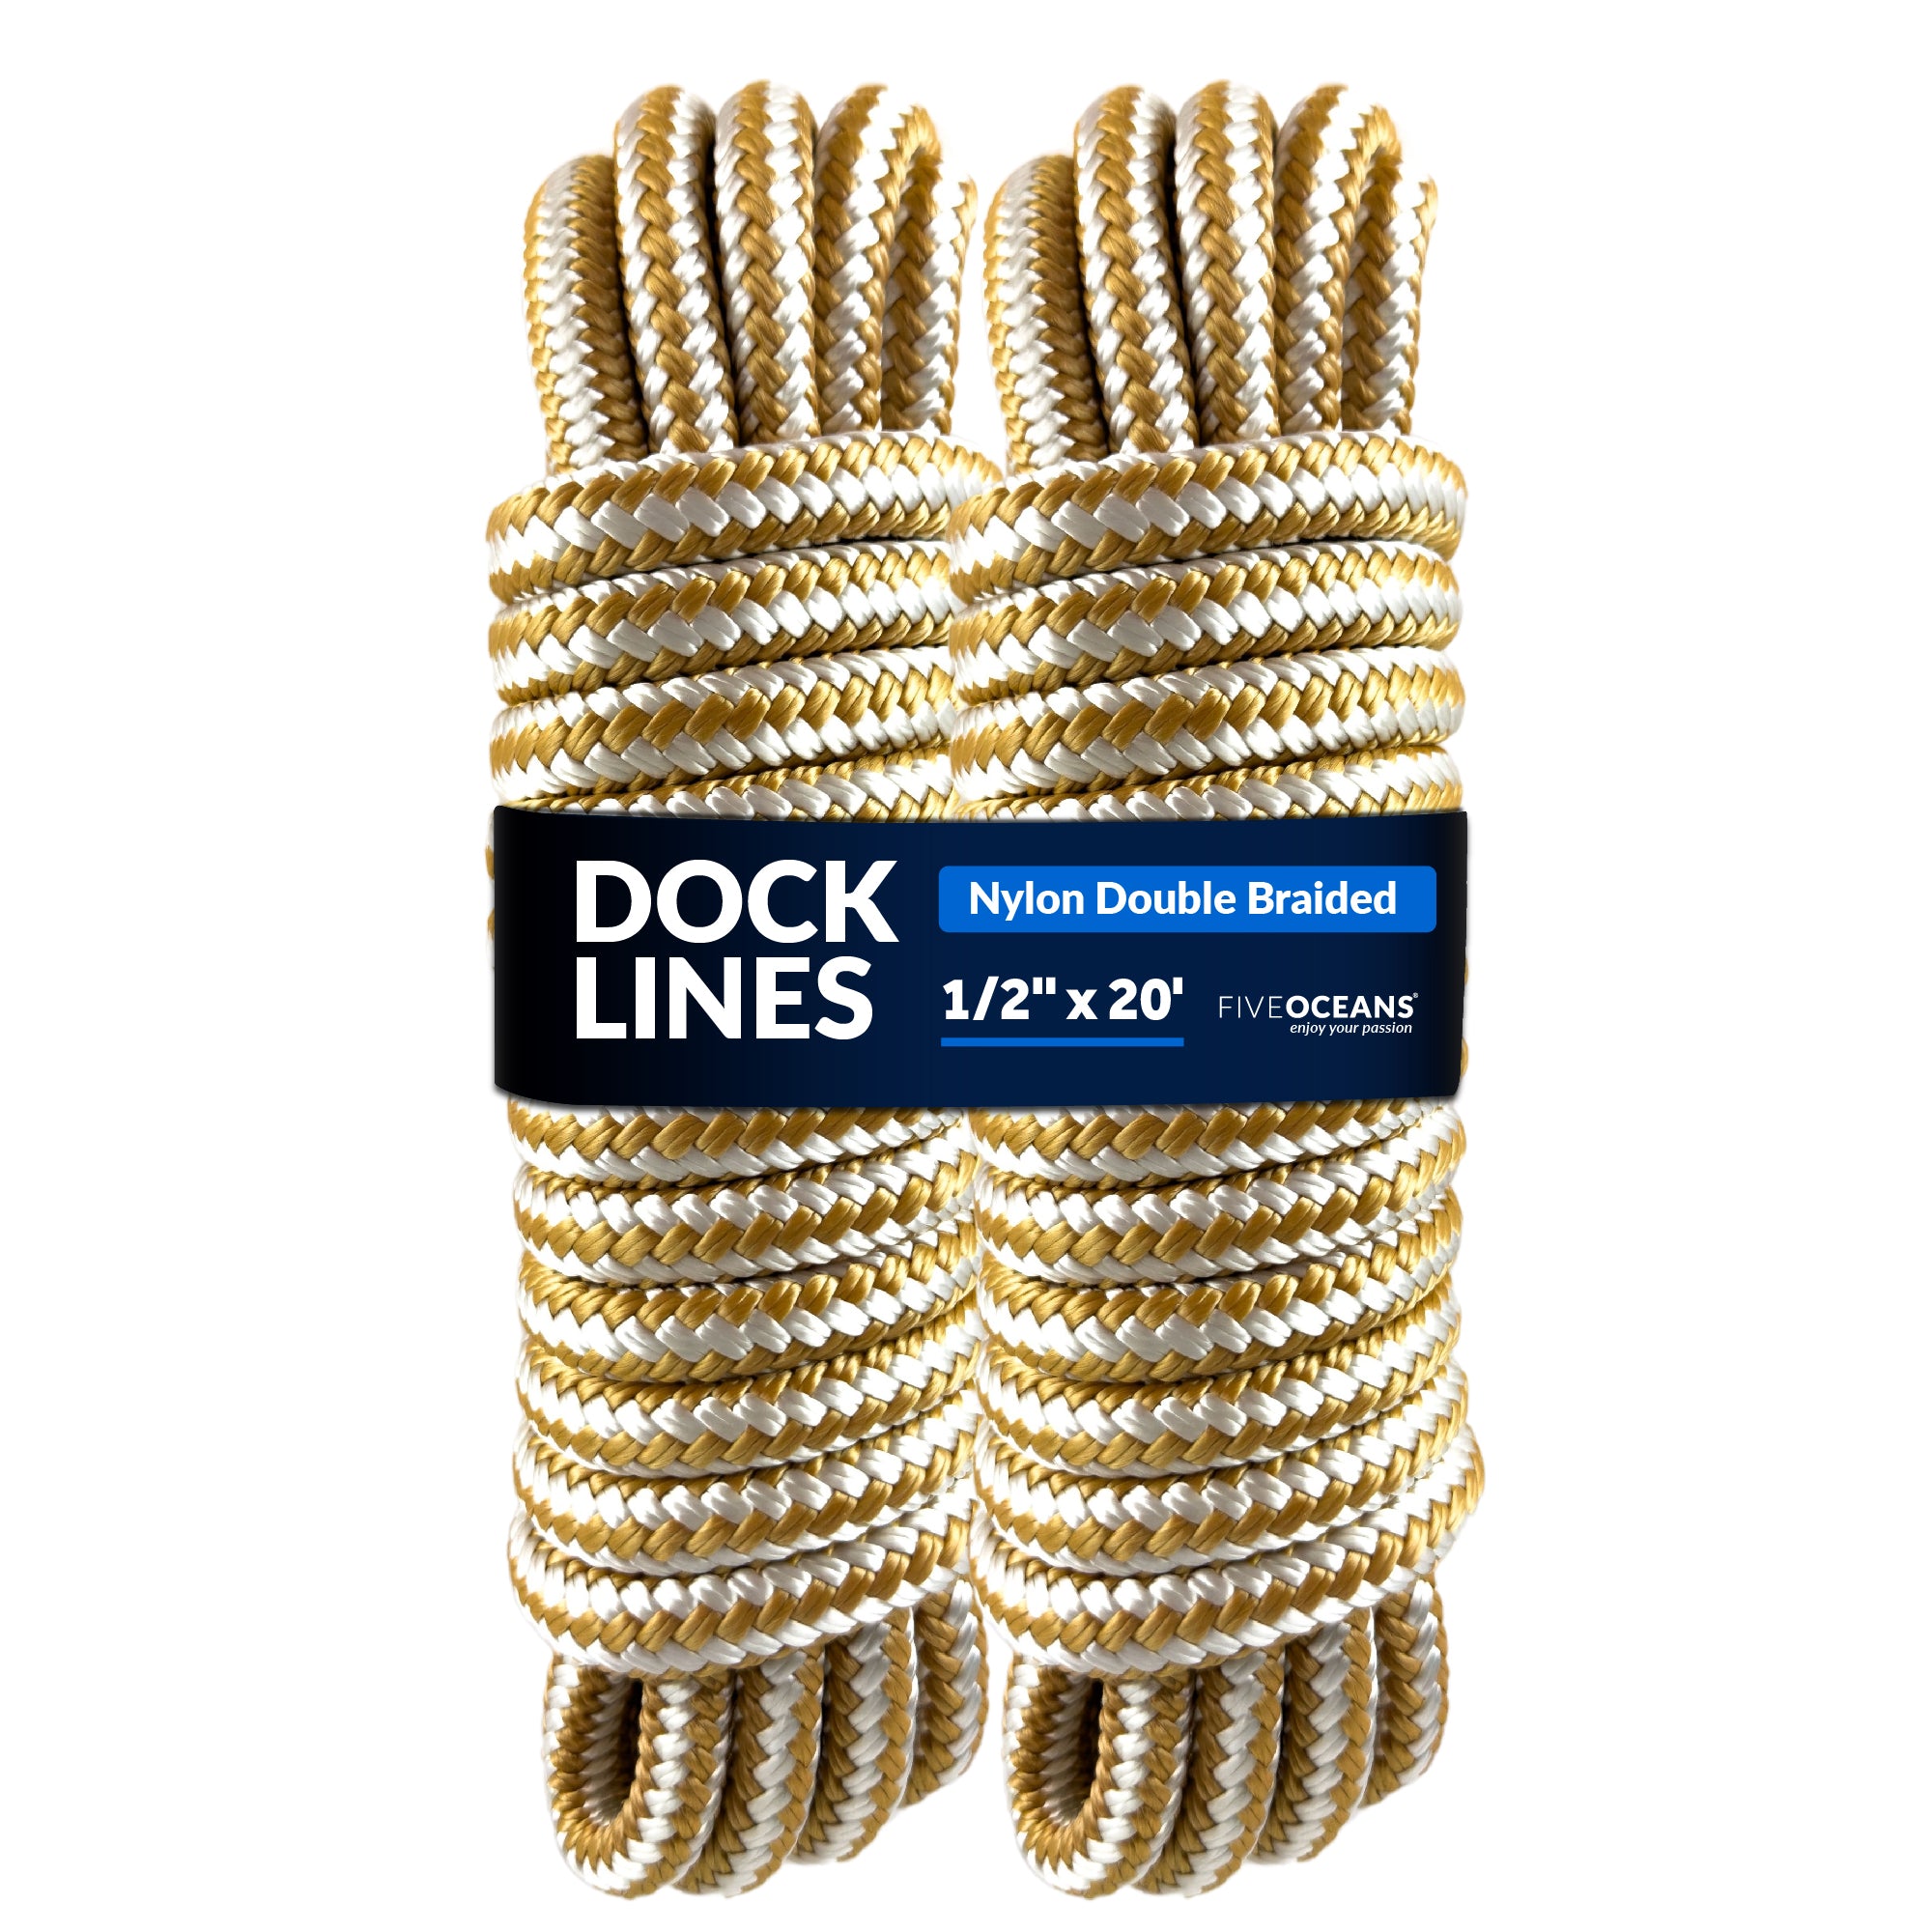 Dock Lines, 1/2" x 20', Gold/White Nylon Double Braided with 12" Eyelet, 2-Pack - FO4274-M2